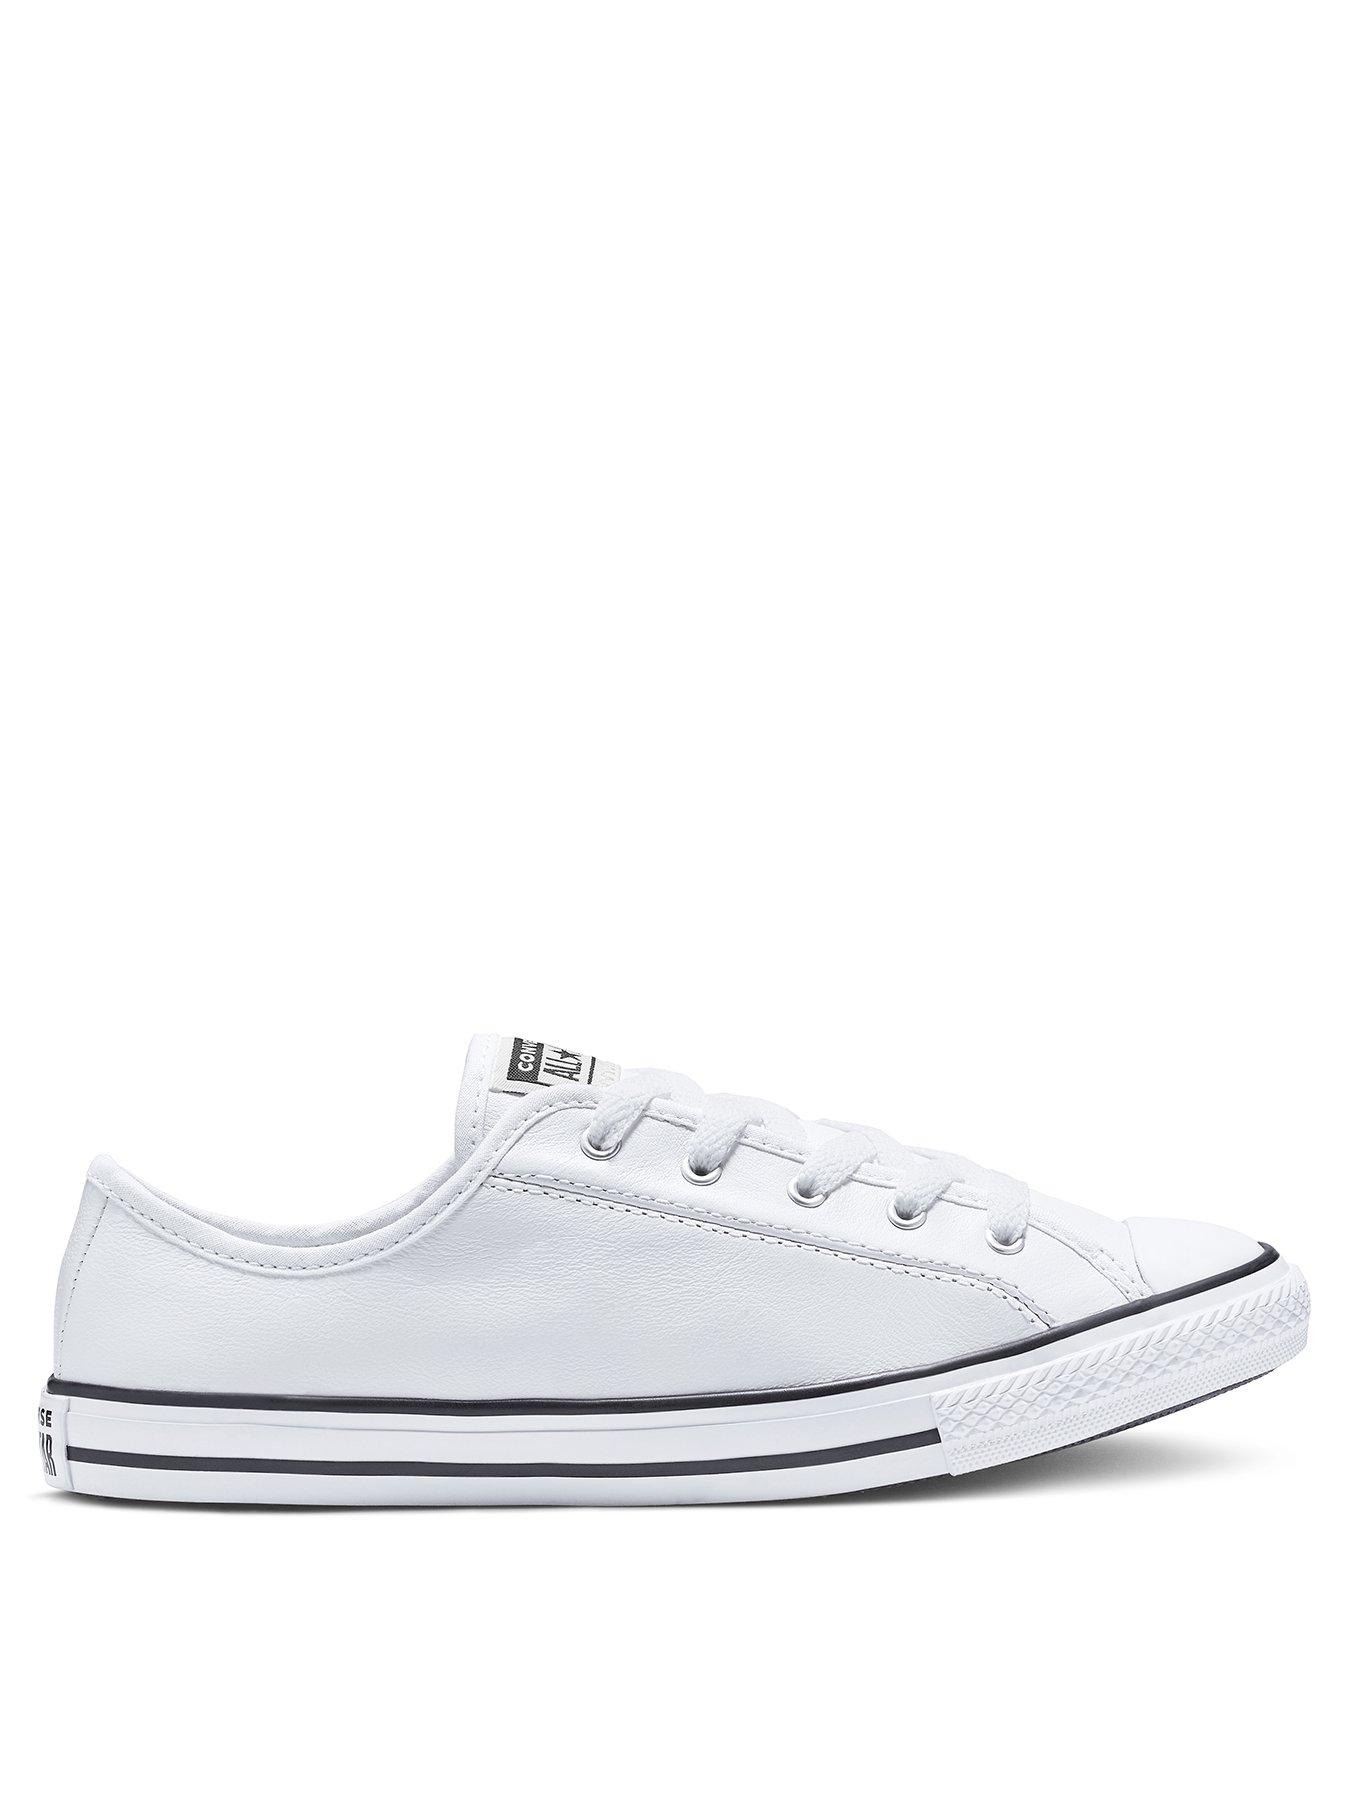 converse chuck taylor all star dainty ox leather